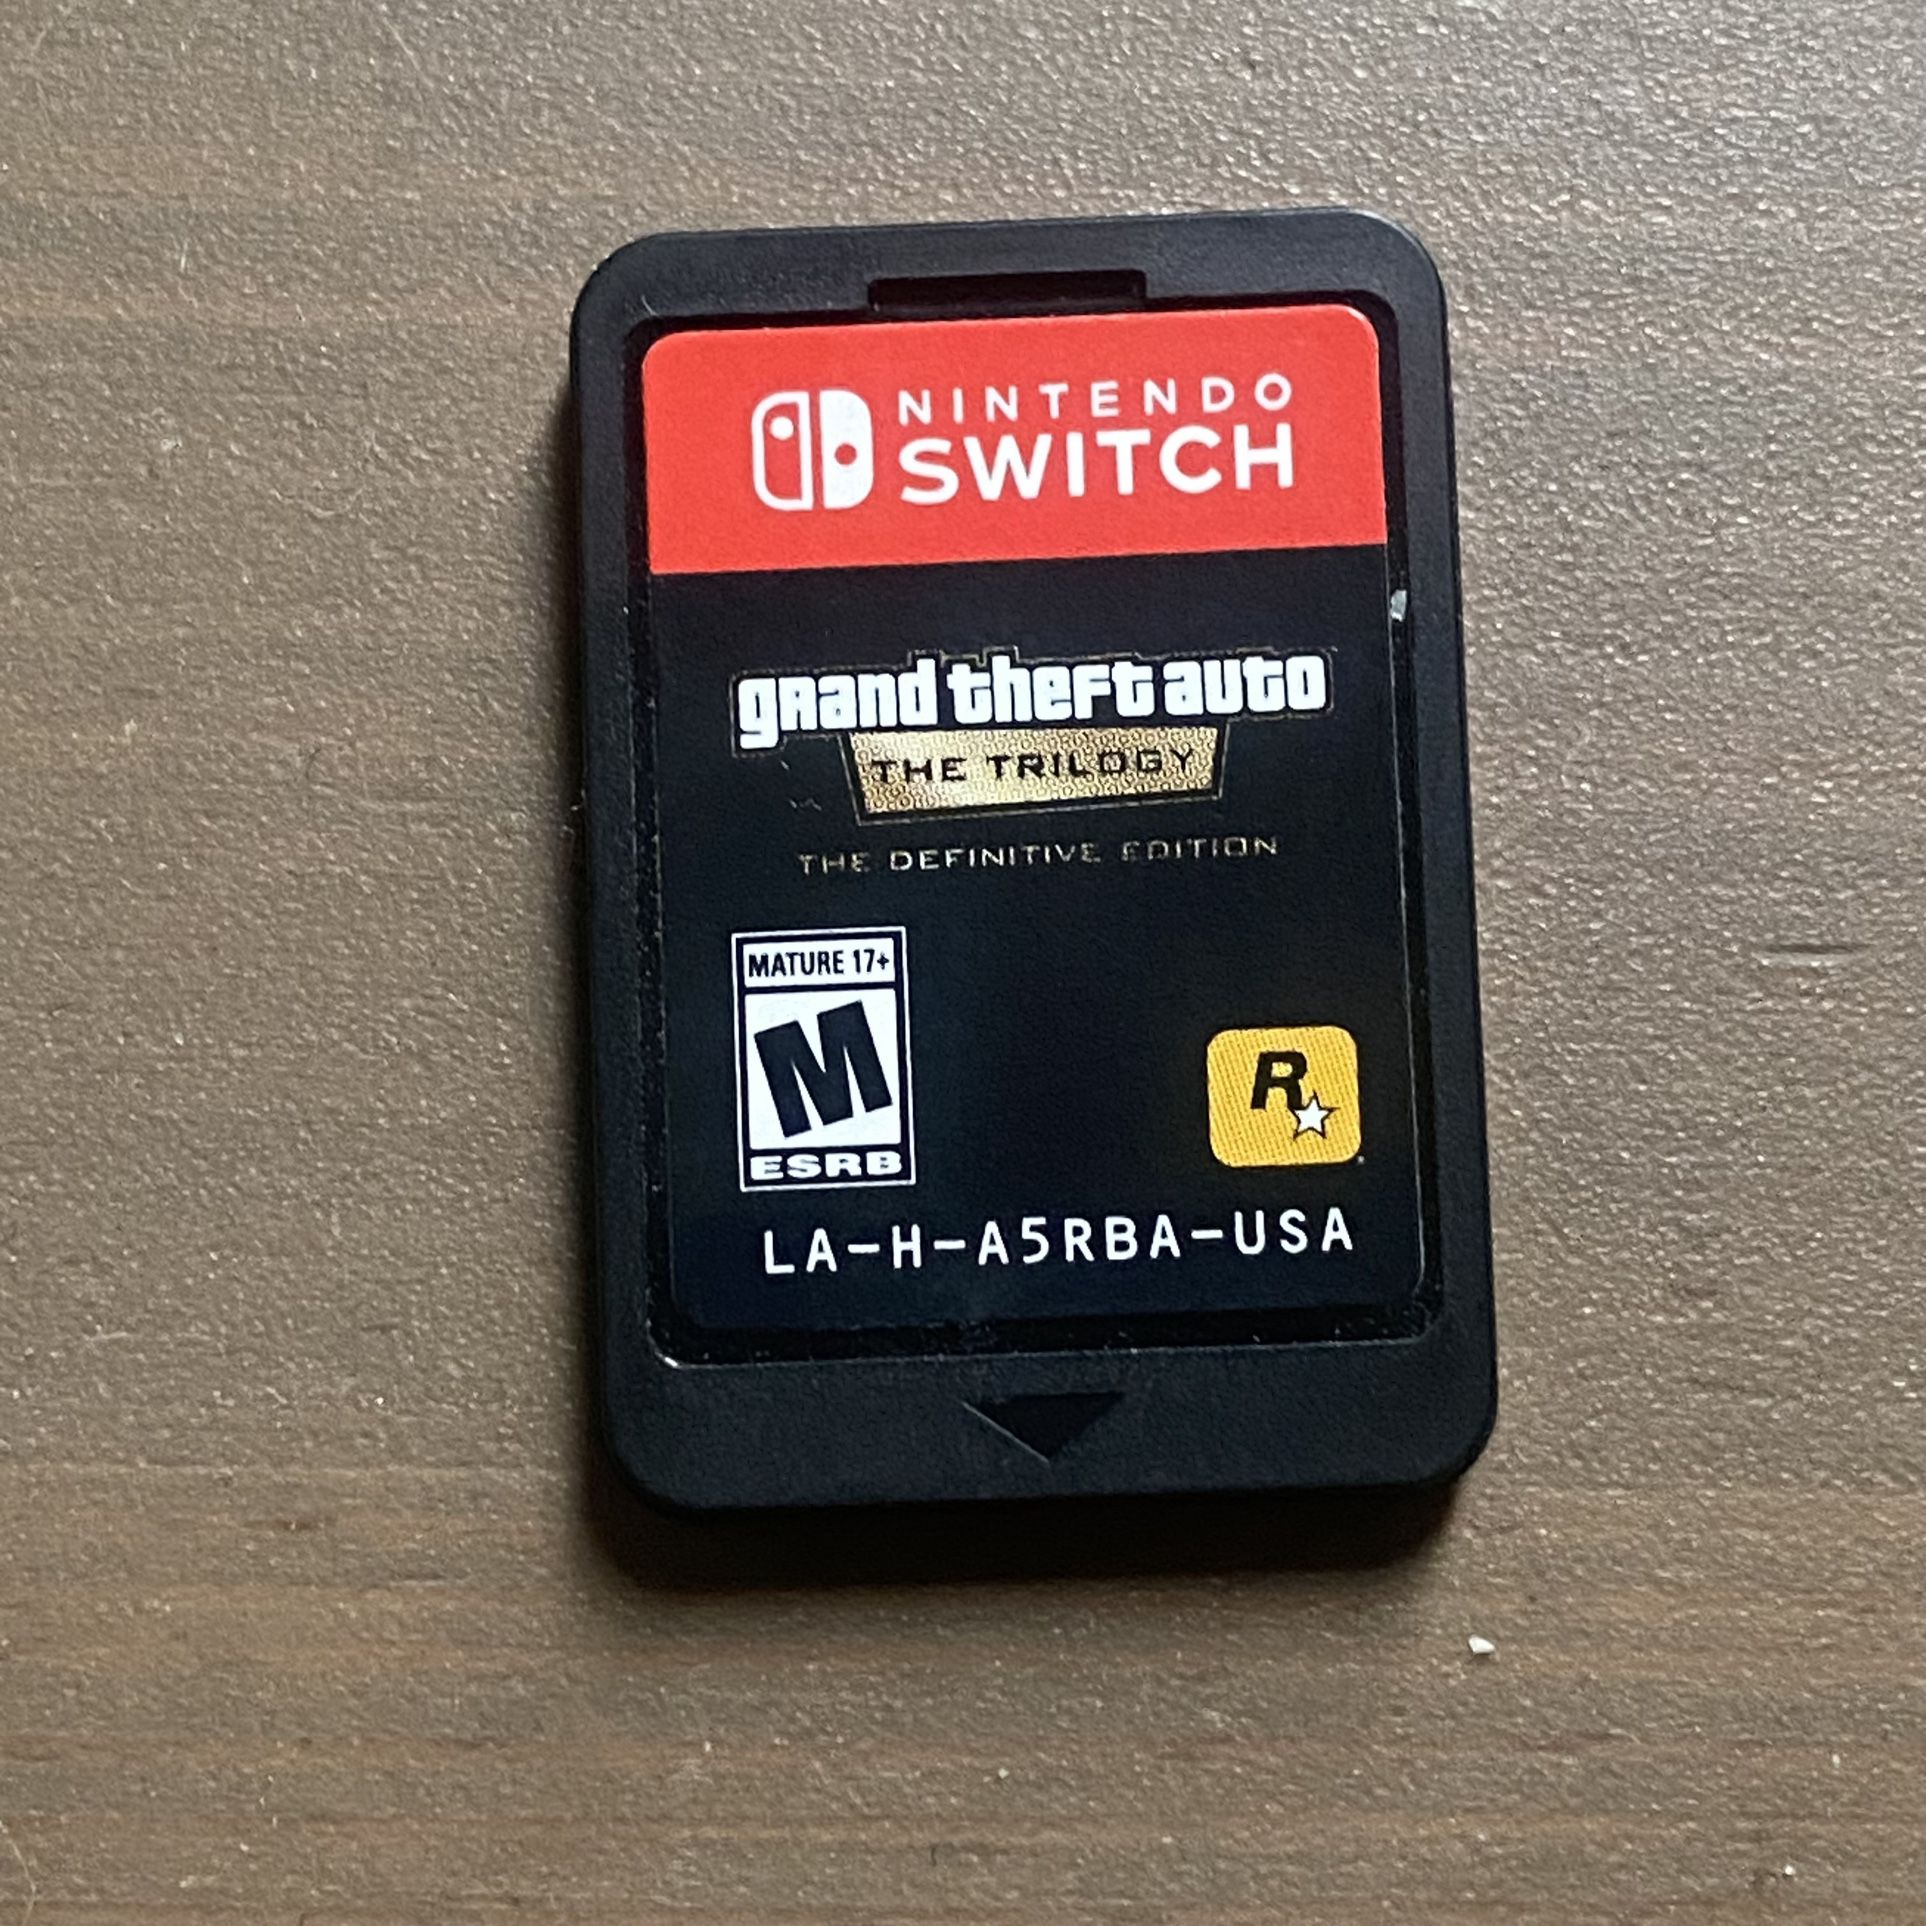 Grand Theft Auto: The Trilogy - The Definitive Edition Nintendo Switch